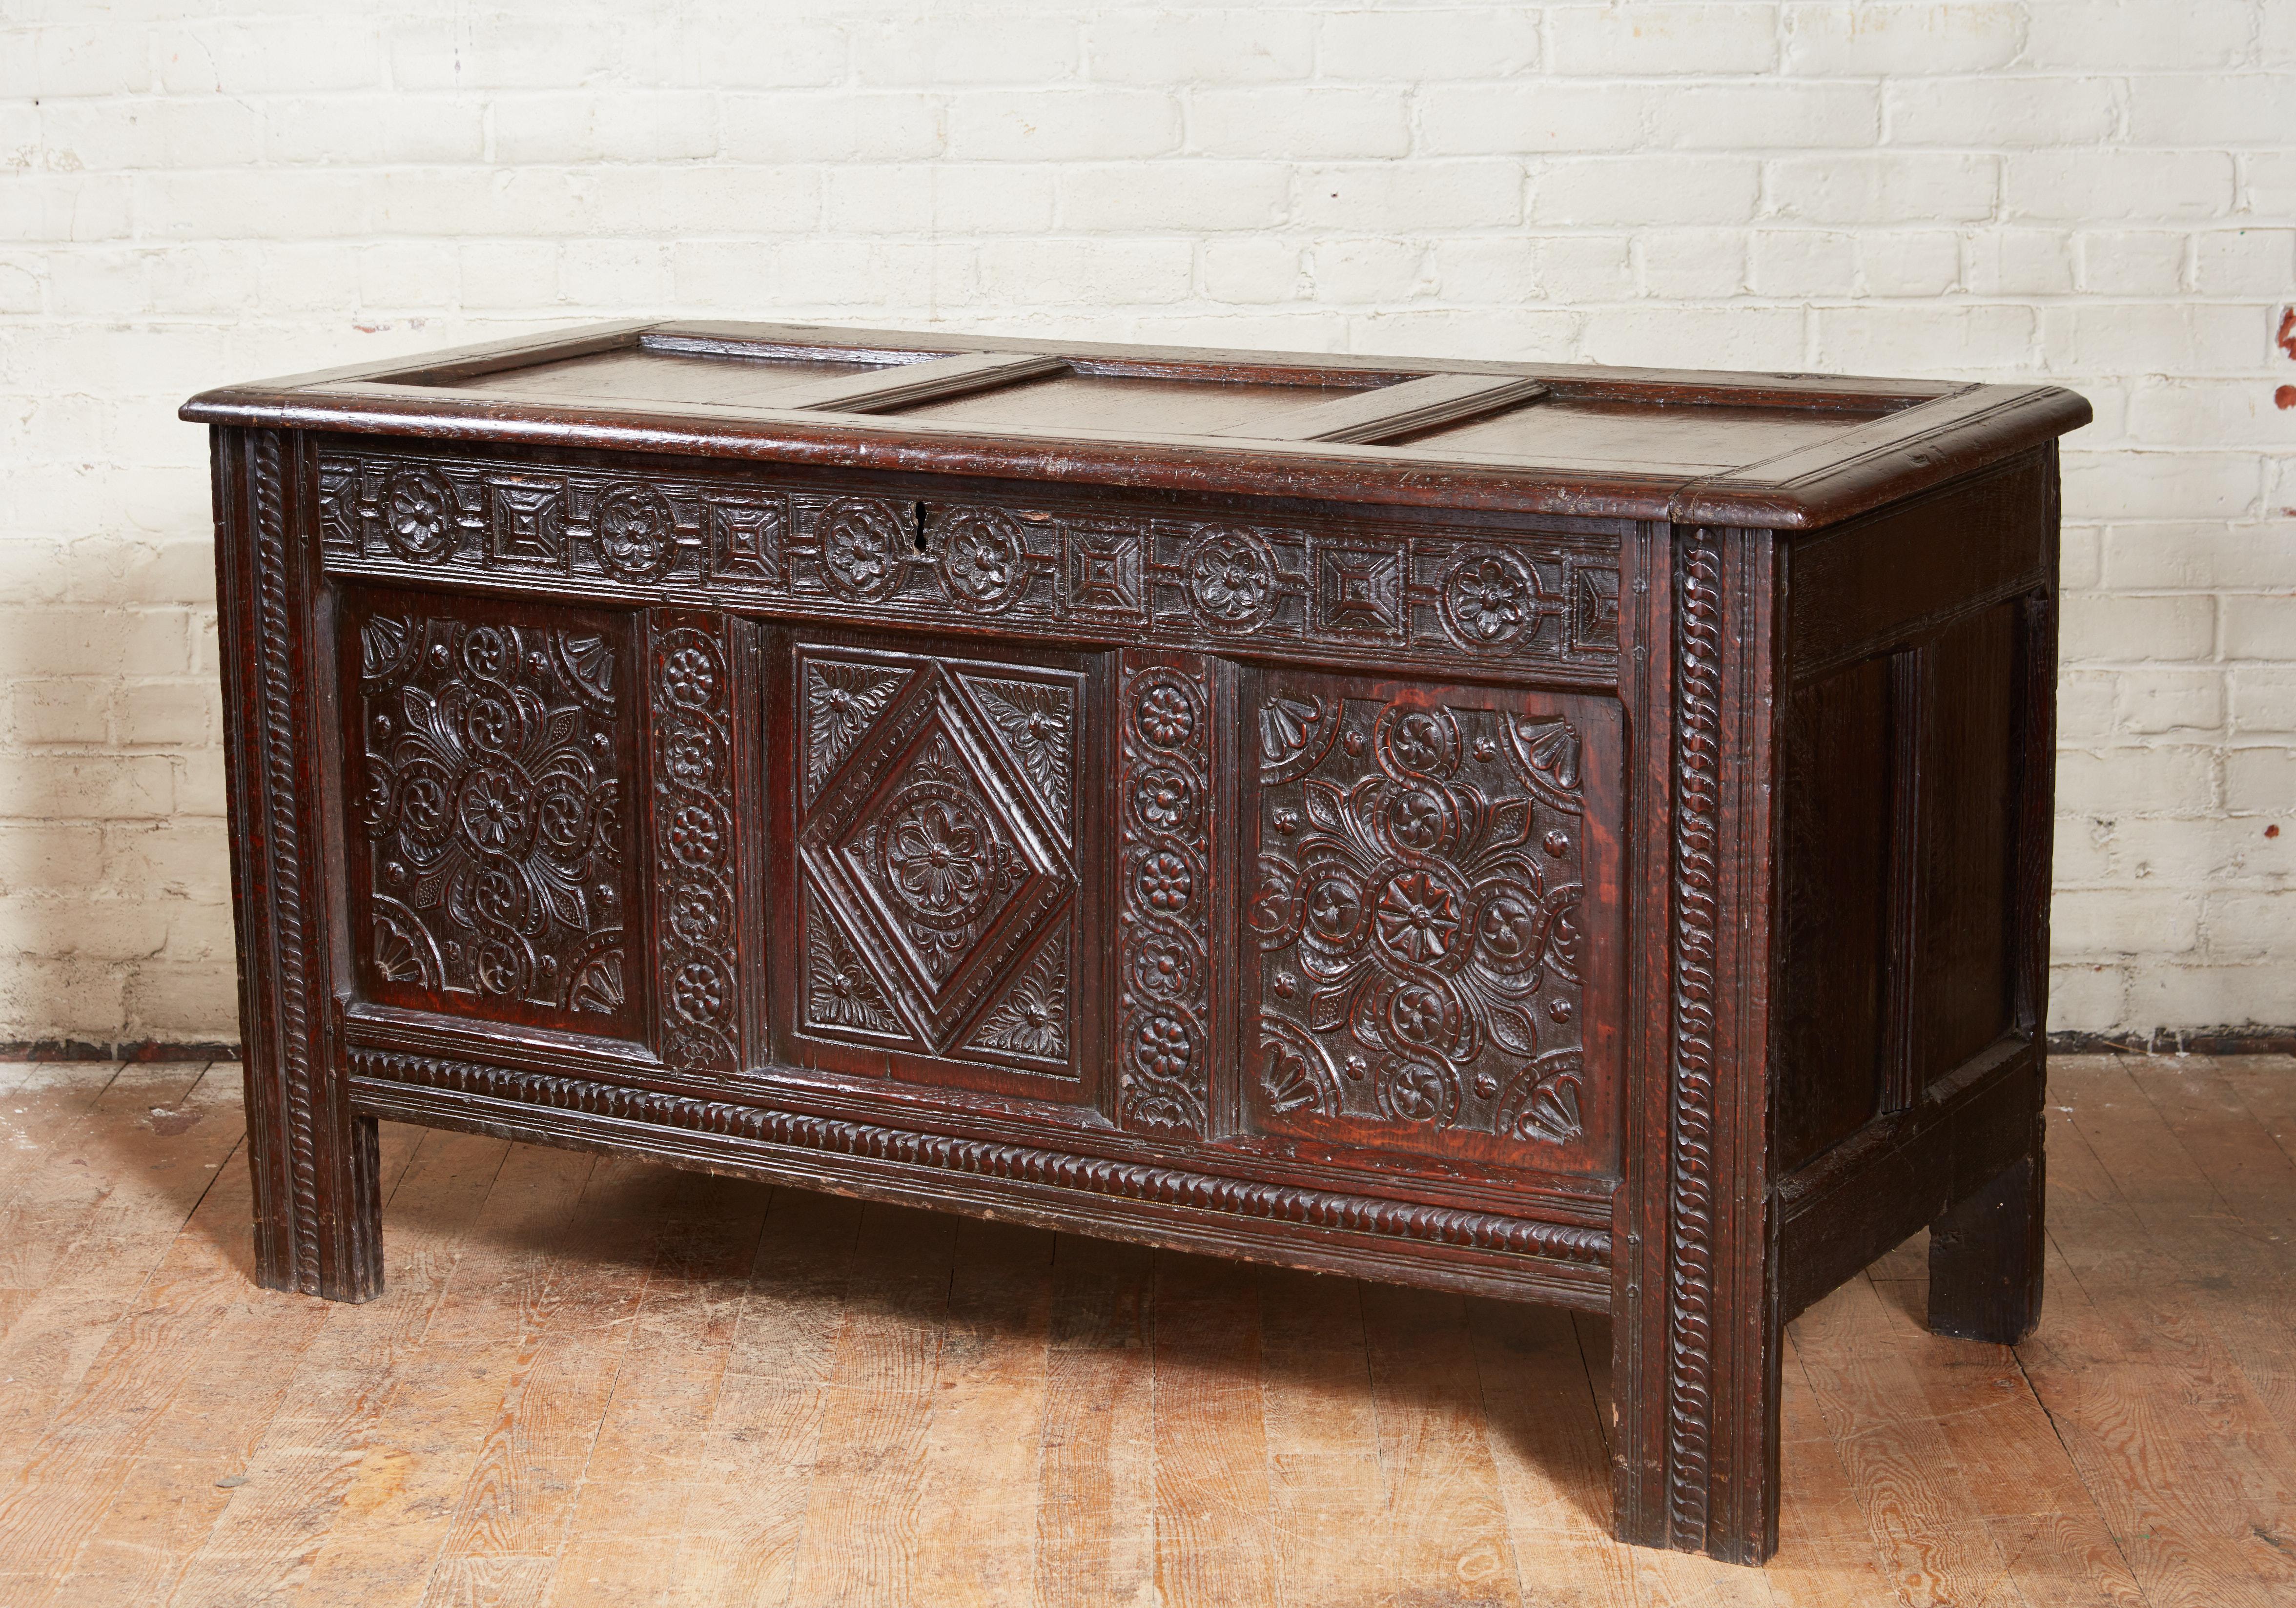 Very fine 17th century English oak coffer, the paneled top with molded stiles and rails over panel front with profusely geometric carved panels, stiles and rails the whole possessing very good rich color and in remarkably original condition.